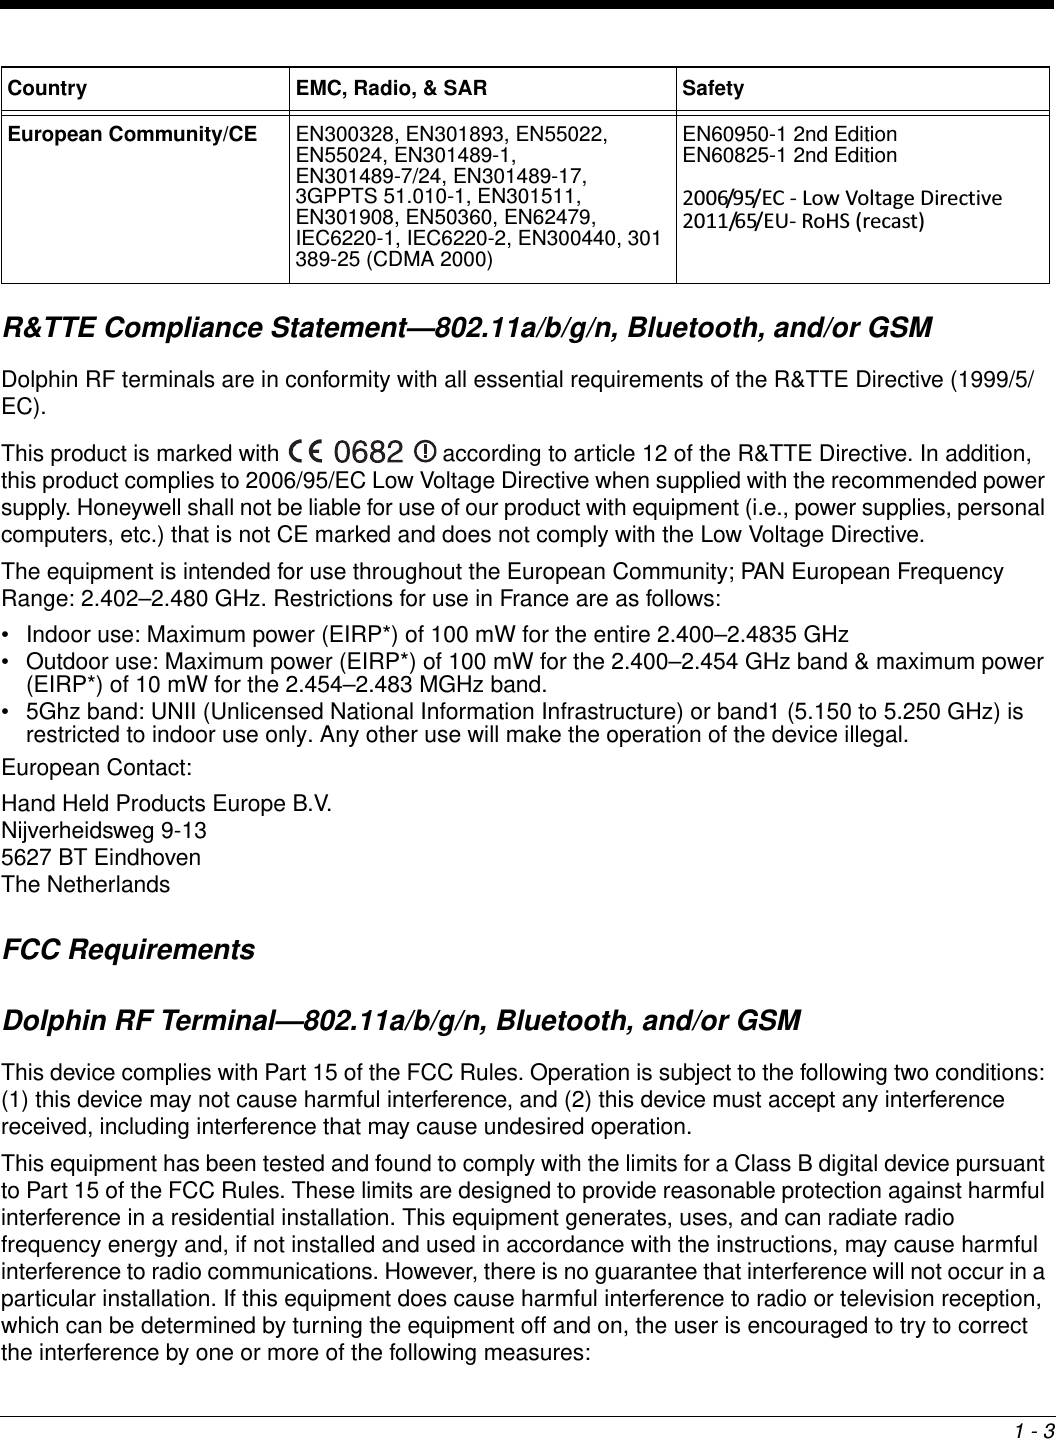 1 - 3R&amp;TTE Compliance Statement—802.11a/b/g/n, Bluetooth, and/or GSMDolphin RF terminals are in conformity with all essential requirements of the R&amp;TTE Directive (1999/5/EC). This product is marked with   according to article 12 of the R&amp;TTE Directive. In addition, this product complies to 2006/95/EC Low Voltage Directive when supplied with the recommended power supply. Honeywell shall not be liable for use of our product with equipment (i.e., power supplies, personal computers, etc.) that is not CE marked and does not comply with the Low Voltage Directive.The equipment is intended for use throughout the European Community; PAN European Frequency Range: 2.402–2.480 GHz. Restrictions for use in France are as follows: • Indoor use: Maximum power (EIRP*) of 100 mW for the entire 2.400–2.4835 GHz • Outdoor use: Maximum power (EIRP*) of 100 mW for the 2.400–2.454 GHz band &amp; maximum power (EIRP*) of 10 mW for the 2.454–2.483 MGHz band.• 5Ghz band: UNII (Unlicensed National Information Infrastructure) or band1 (5.150 to 5.250 GHz) is restricted to indoor use only. Any other use will make the operation of the device illegal.European Contact:Hand Held Products Europe B.V.Nijverheidsweg 9-135627 BT EindhovenThe NetherlandsFCC RequirementsDolphin RF Terminal—802.11a/b/g/n, Bluetooth, and/or GSMThis device complies with Part 15 of the FCC Rules. Operation is subject to the following two conditions: (1) this device may not cause harmful interference, and (2) this device must accept any interference received, including interference that may cause undesired operation.This equipment has been tested and found to comply with the limits for a Class B digital device pursuant to Part 15 of the FCC Rules. These limits are designed to provide reasonable protection against harmful interference in a residential installation. This equipment generates, uses, and can radiate radio frequency energy and, if not installed and used in accordance with the instructions, may cause harmful interference to radio communications. However, there is no guarantee that interference will not occur in a particular installation. If this equipment does cause harmful interference to radio or television reception, which can be determined by turning the equipment off and on, the user is encouraged to try to correct the interference by one or more of the following measures:European Community/CE EN300328, EN301893, EN55022, EN55024, EN301489-1, EN301489-7/24, EN301489-17, 3GPPTS 51.010-1, EN301511, EN301908, EN50360, EN62479, IEC6220-1, IEC6220-2, EN300440, 301 389-25 (CDMA 2000)EN60950-1 2nd EditionEN60825-1 2nd Edition2006/95/EC - Low Voltage Directive 2011/65/EU- RoHS (recast) Country EMC, Radio, &amp; SAR Safety